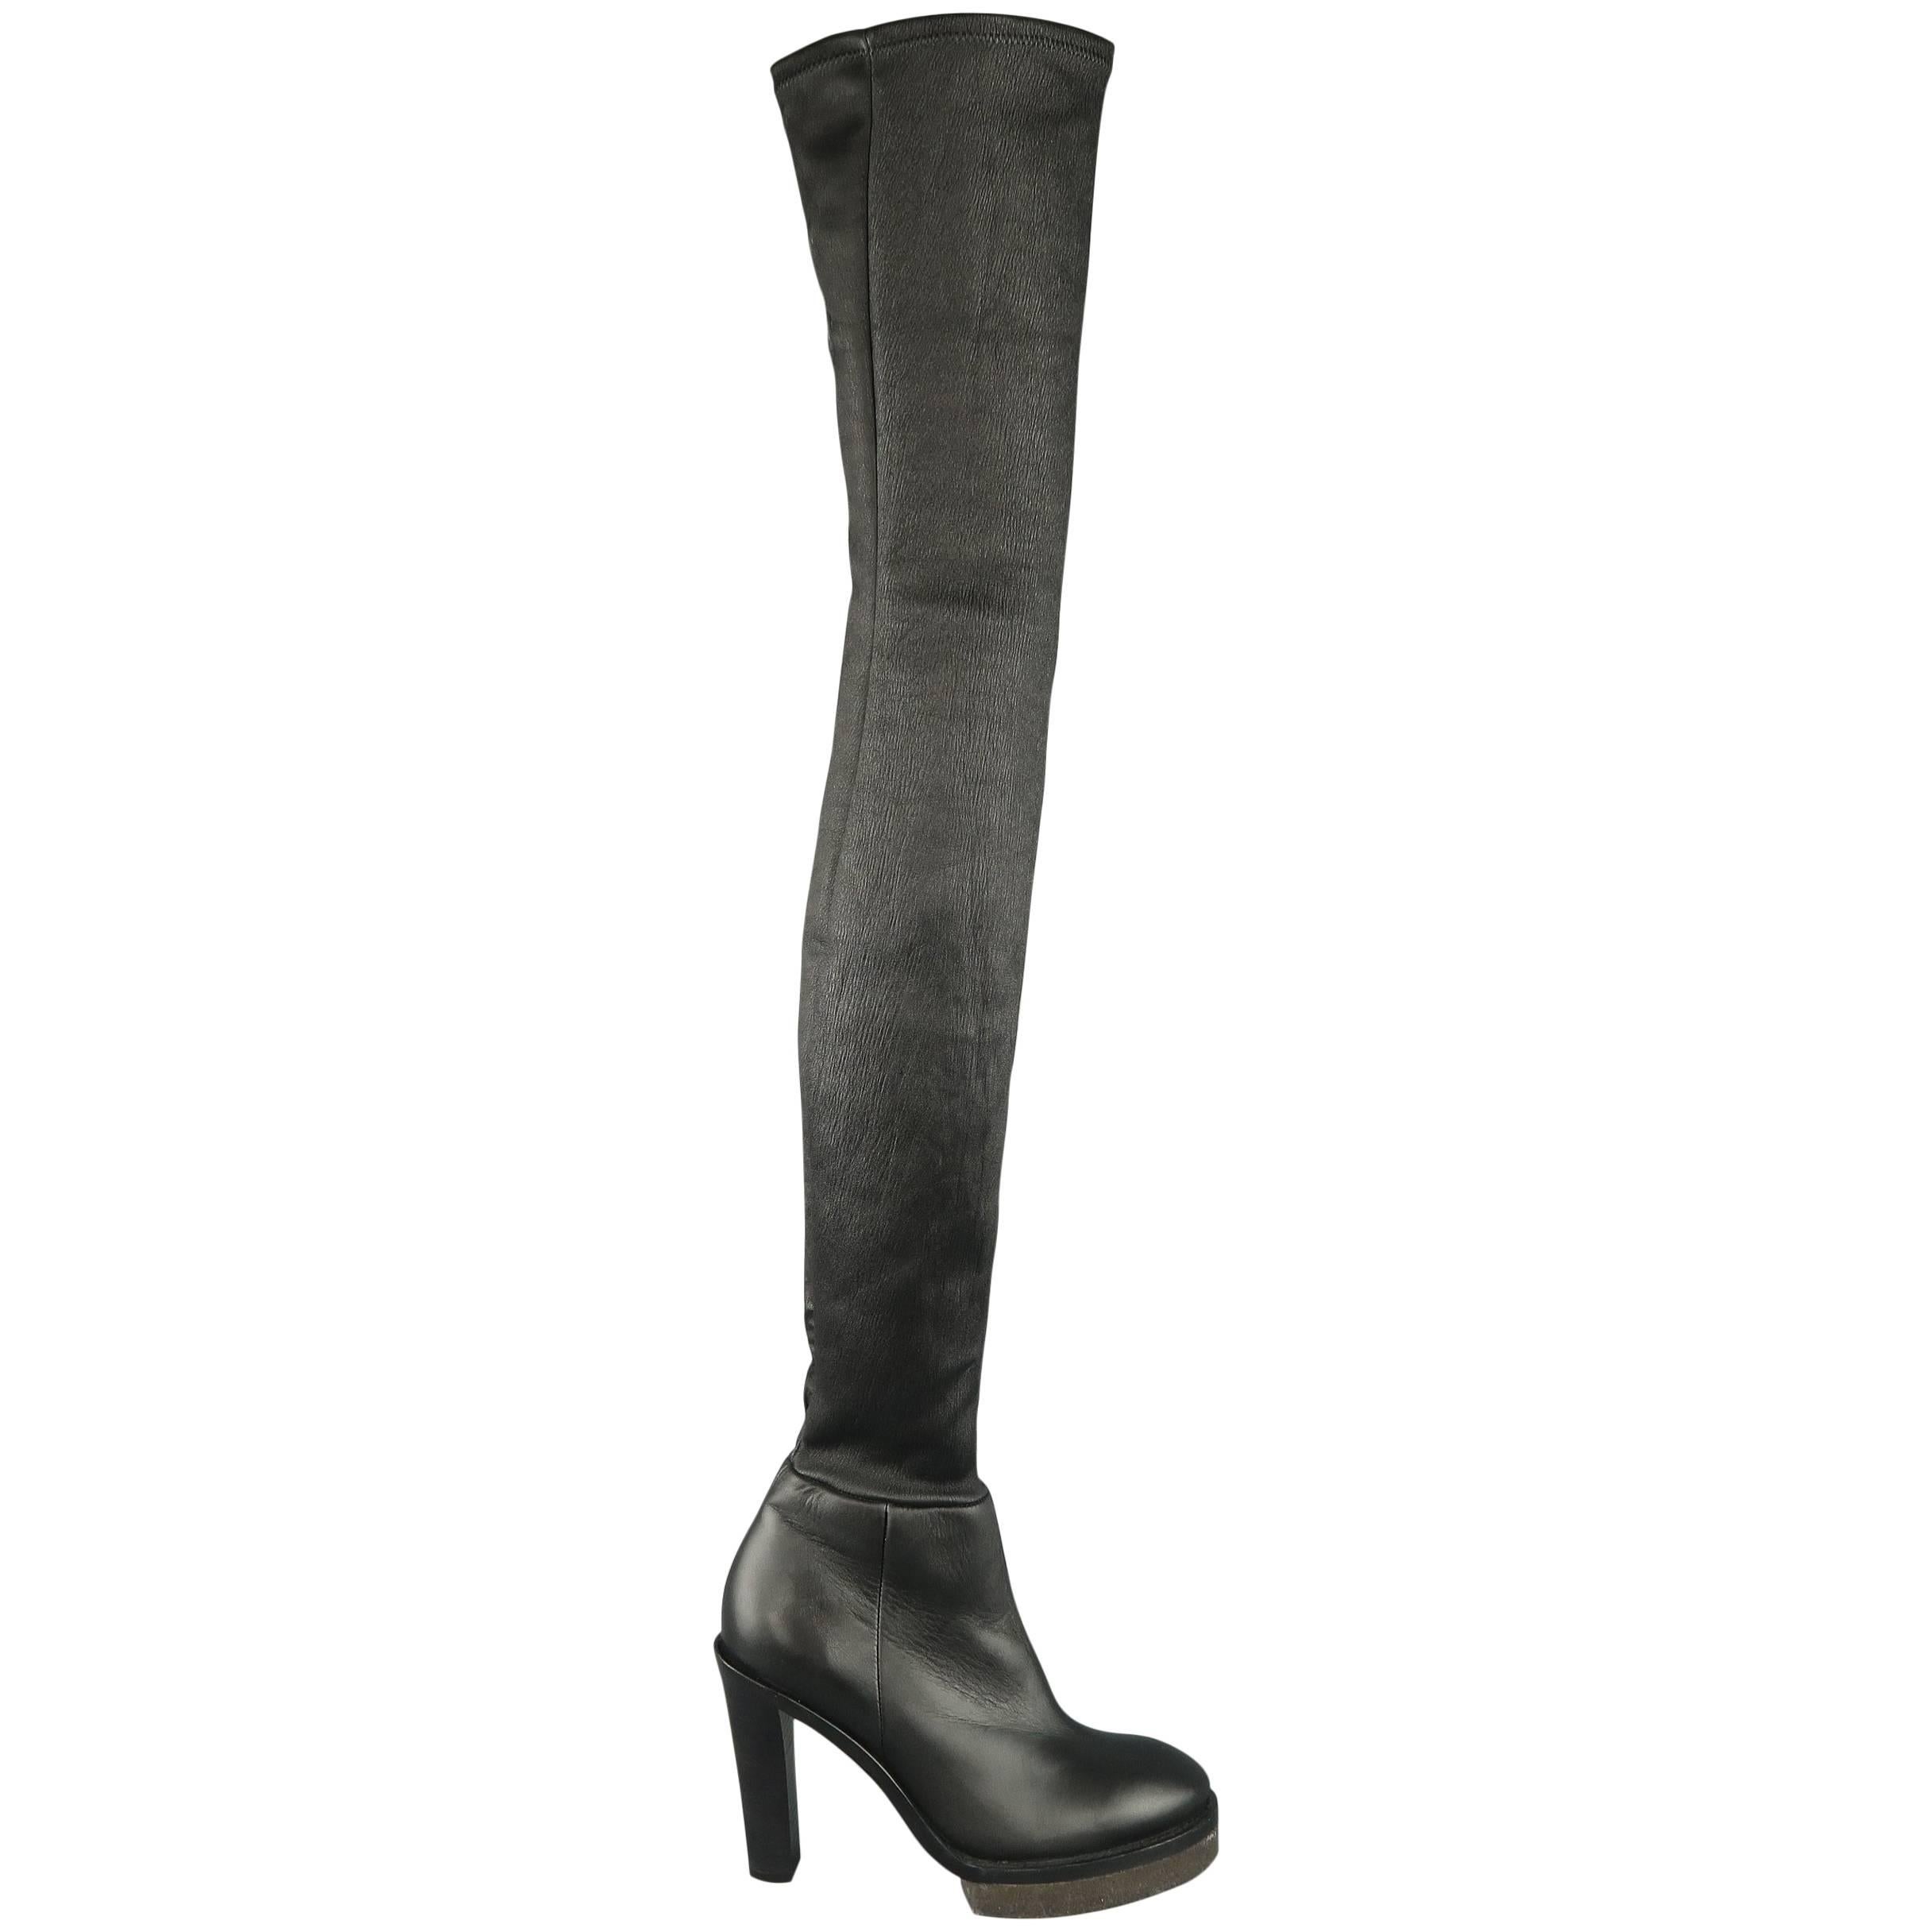 ACNE STUDIOS Size 6 Black Leather REVERY Platform Thigh High Boots